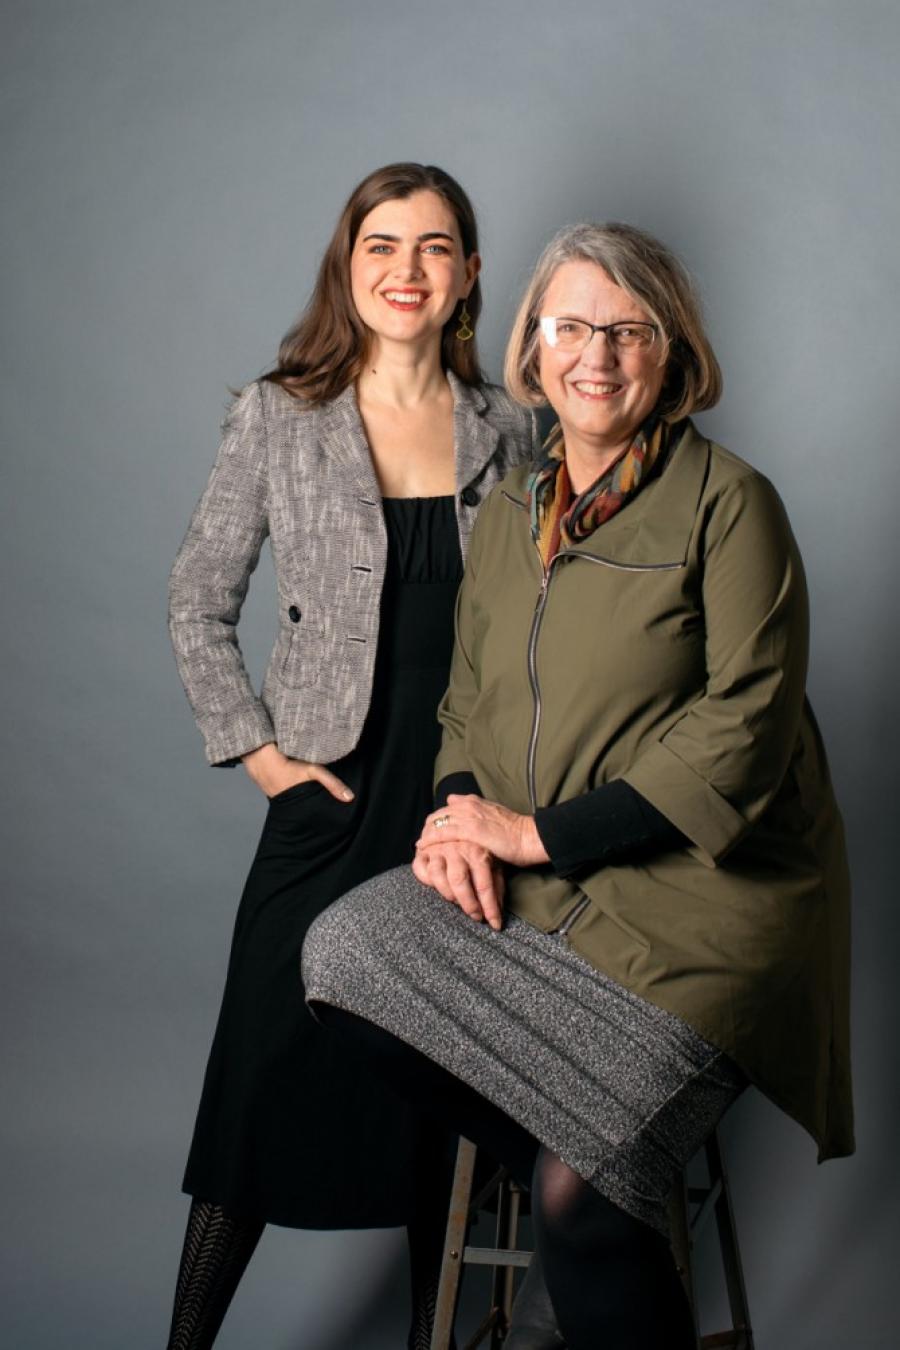  Caitlín Barrett, associate professor of classics in the College of Arts and Sciences, and Kathryn Gleason ’79, professor of landscape architecture in the College of Agriculture and Life Sciences, have been collaborating since 2016 on the excavation 